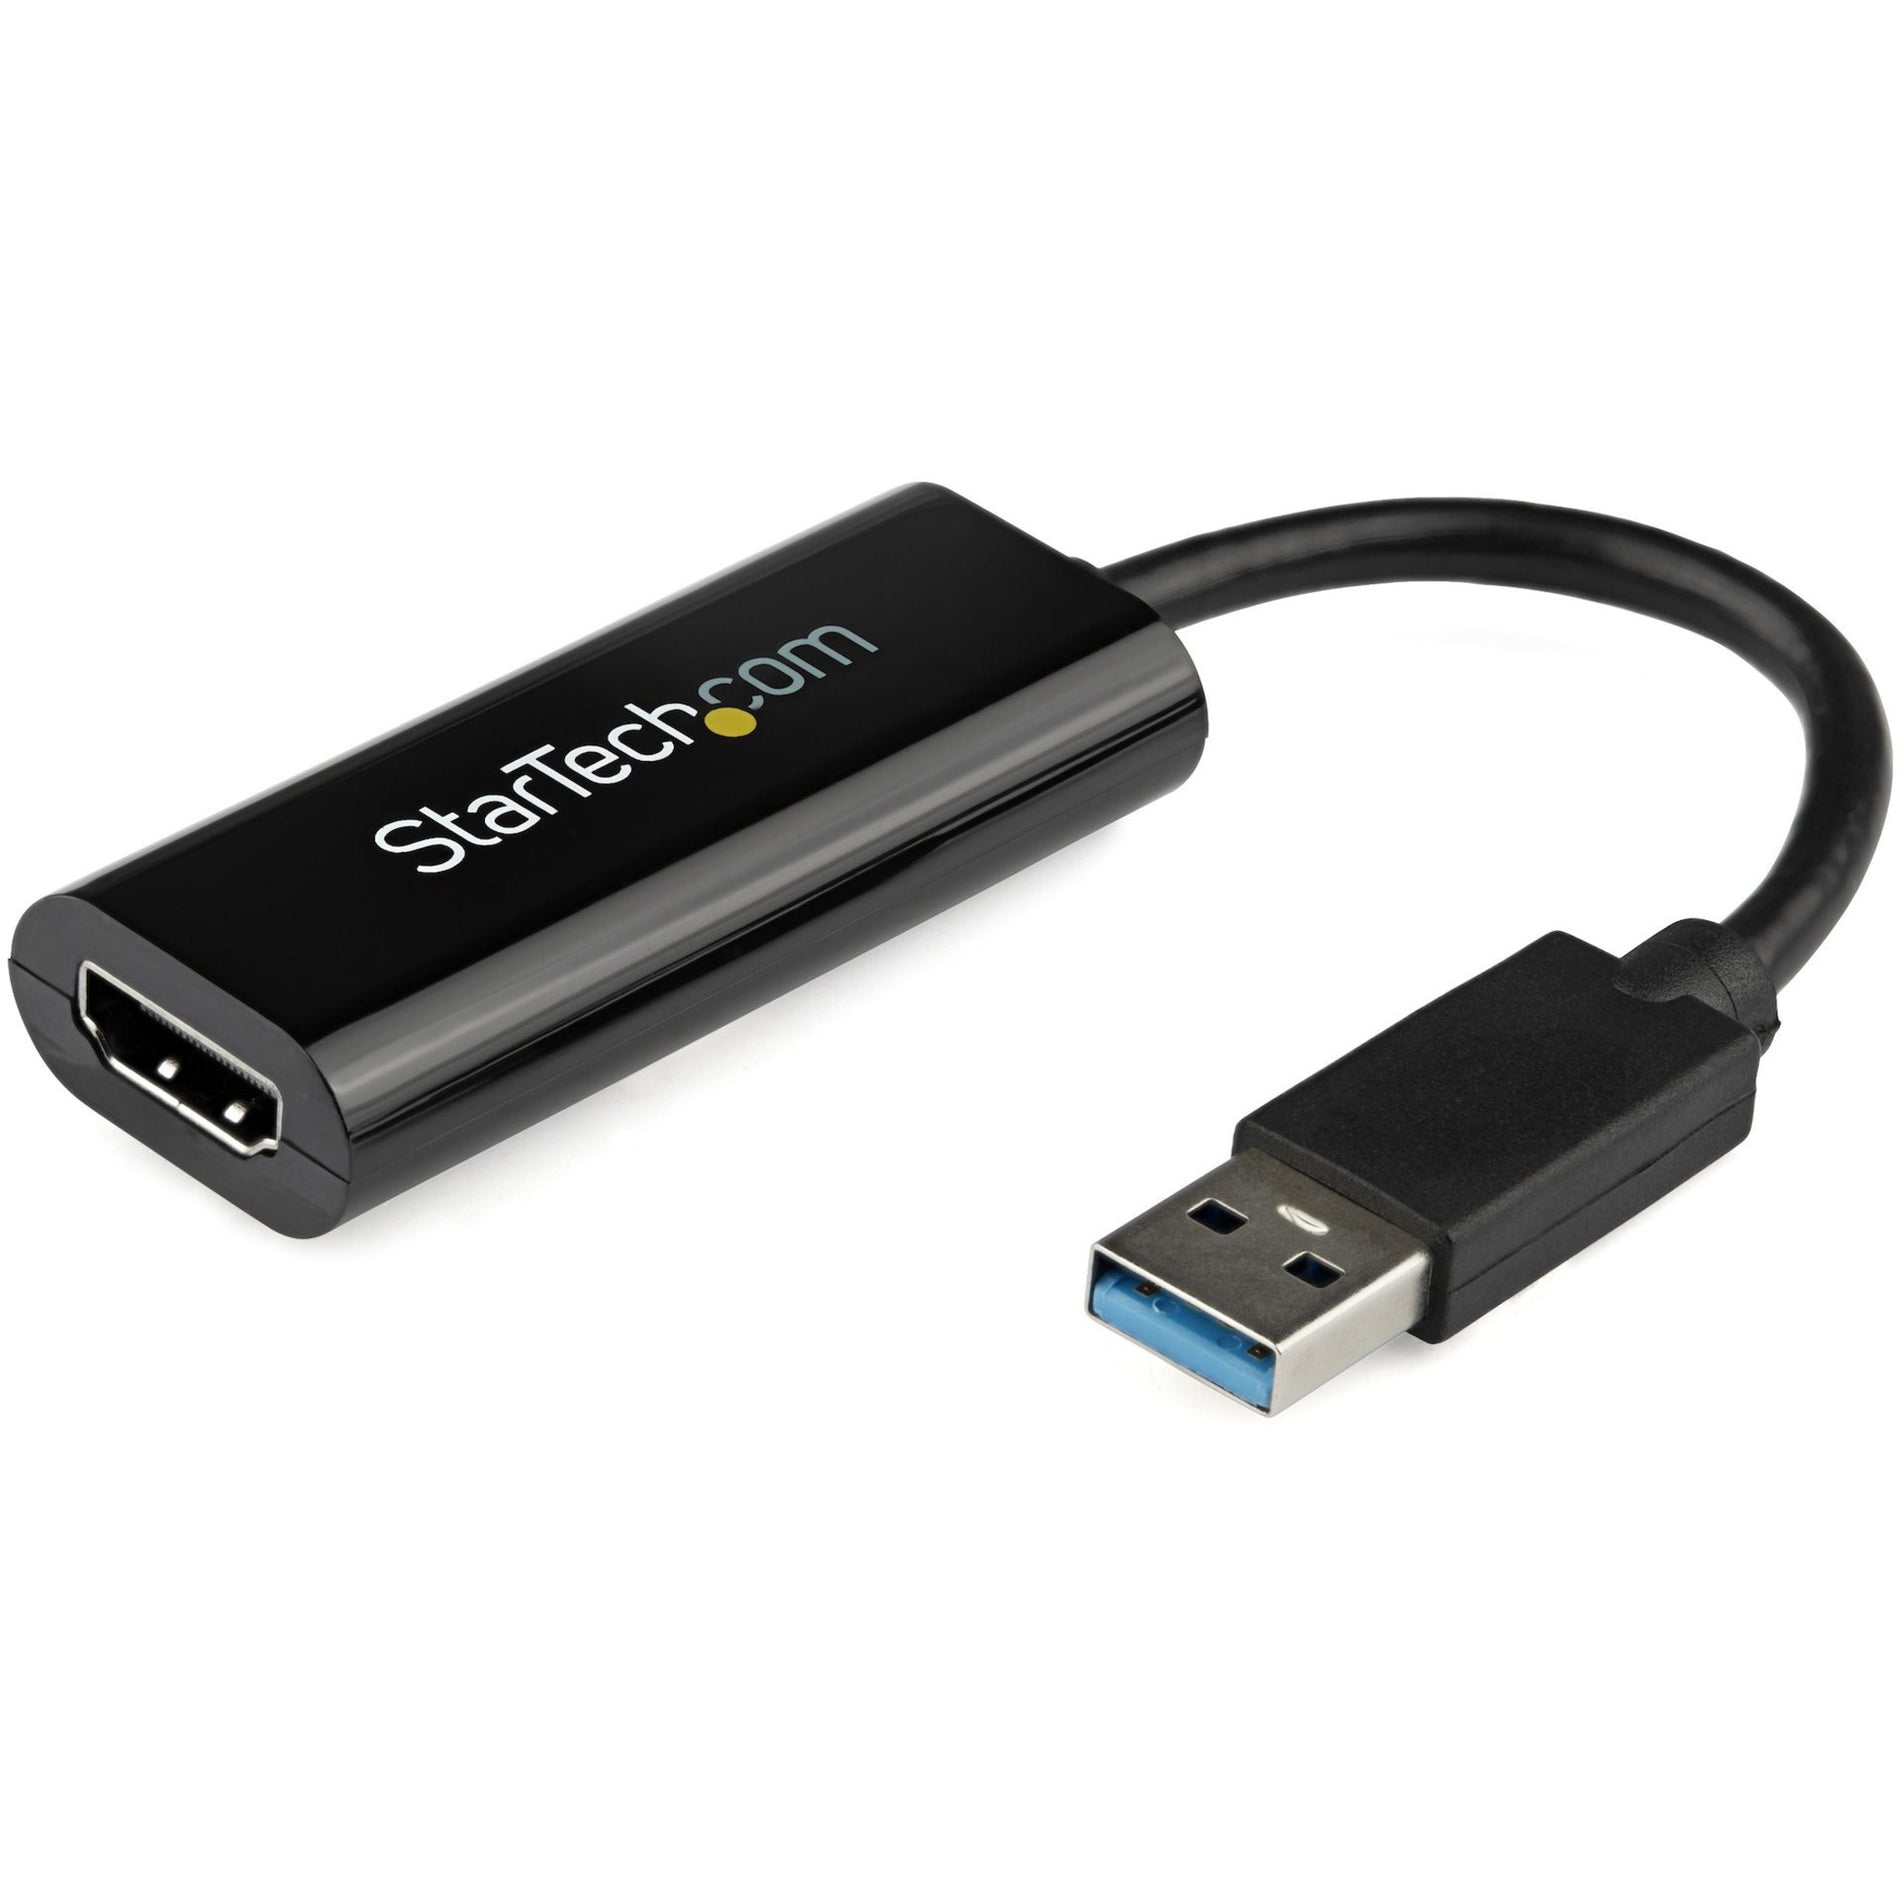 StarTech.com USB32HDES Slim USB 3.0 to HDMI External Video Card Multi Monitor Adapter, Full HD 1080p Support